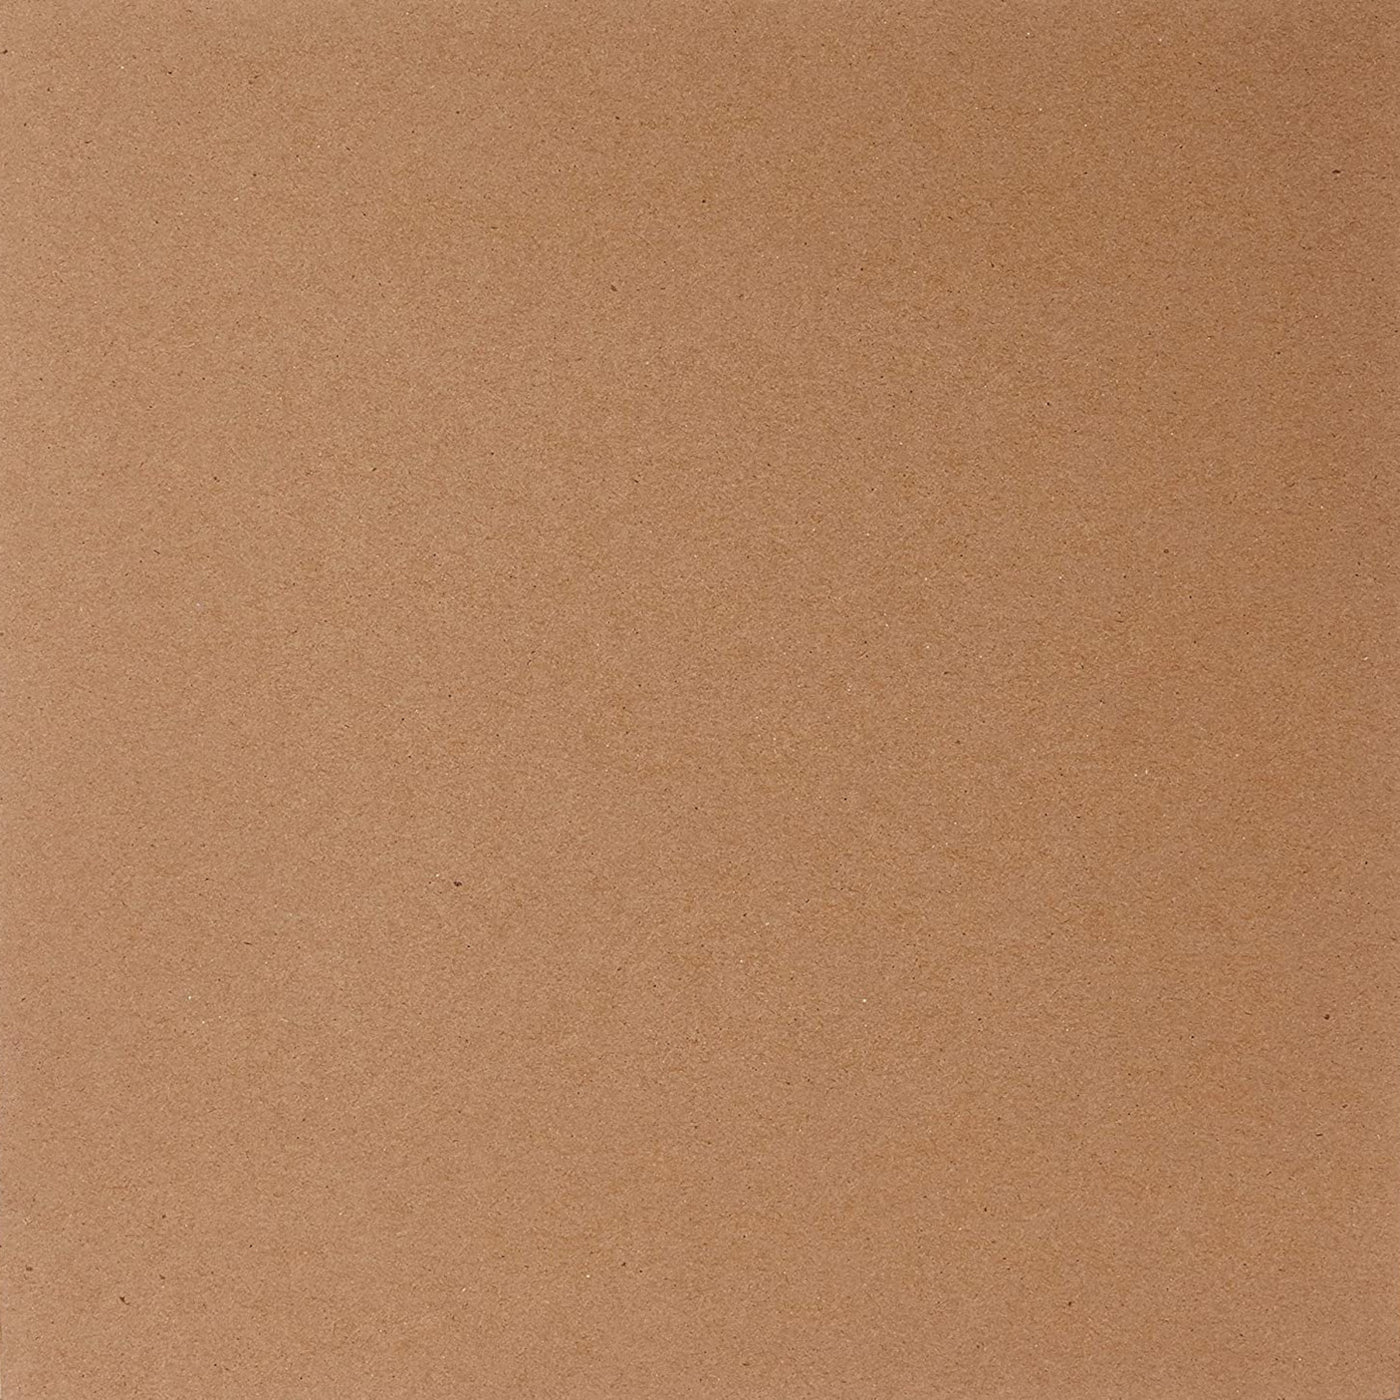 12x12 natural color chipboard from Grafix